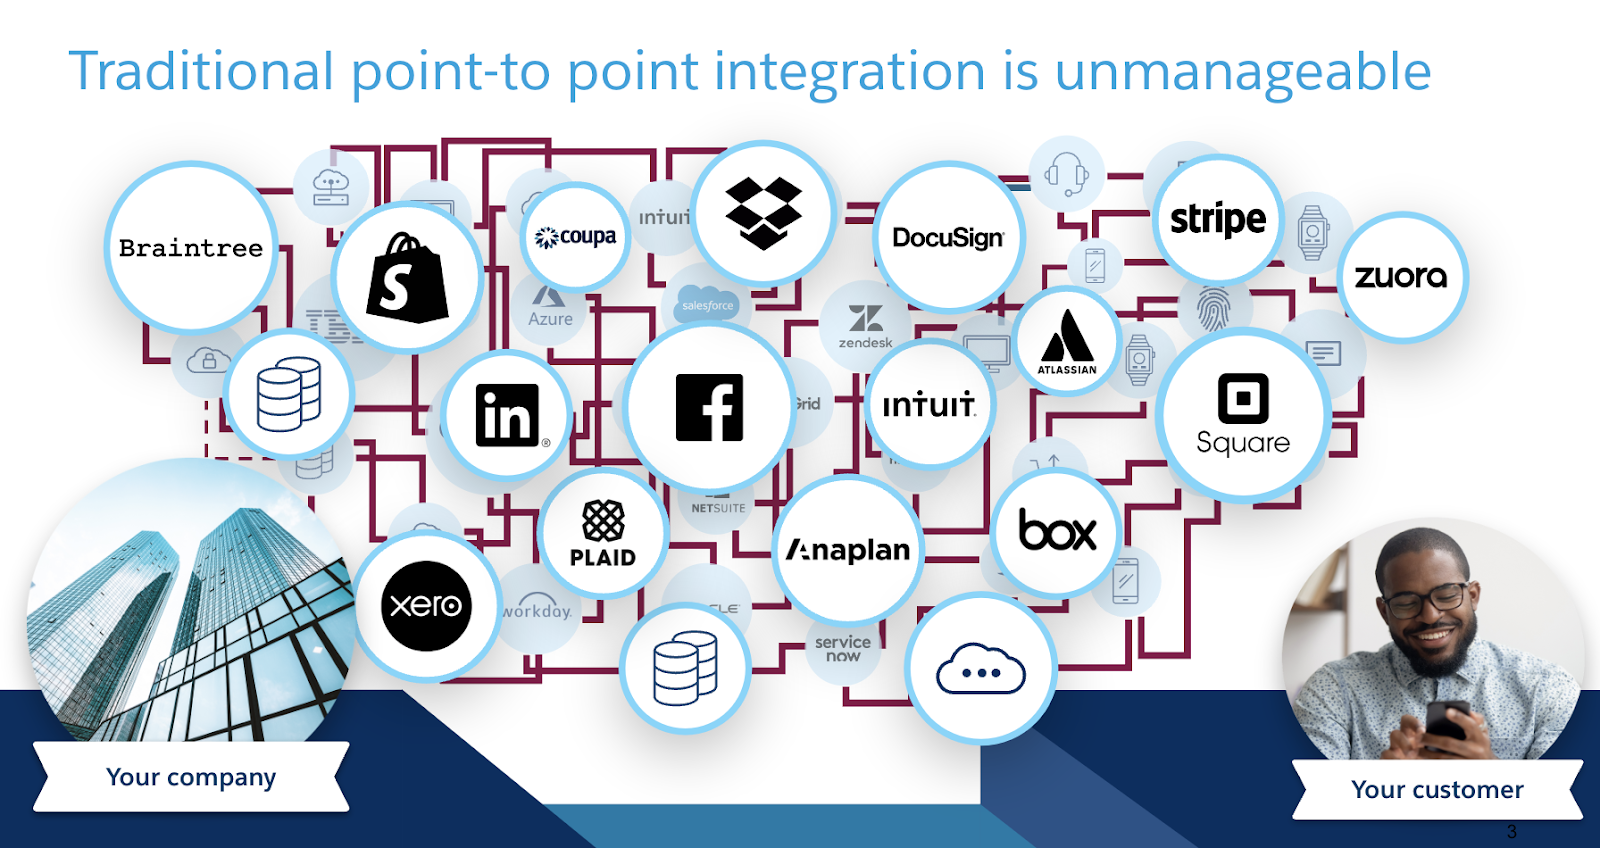 Traditional point-to-point integration